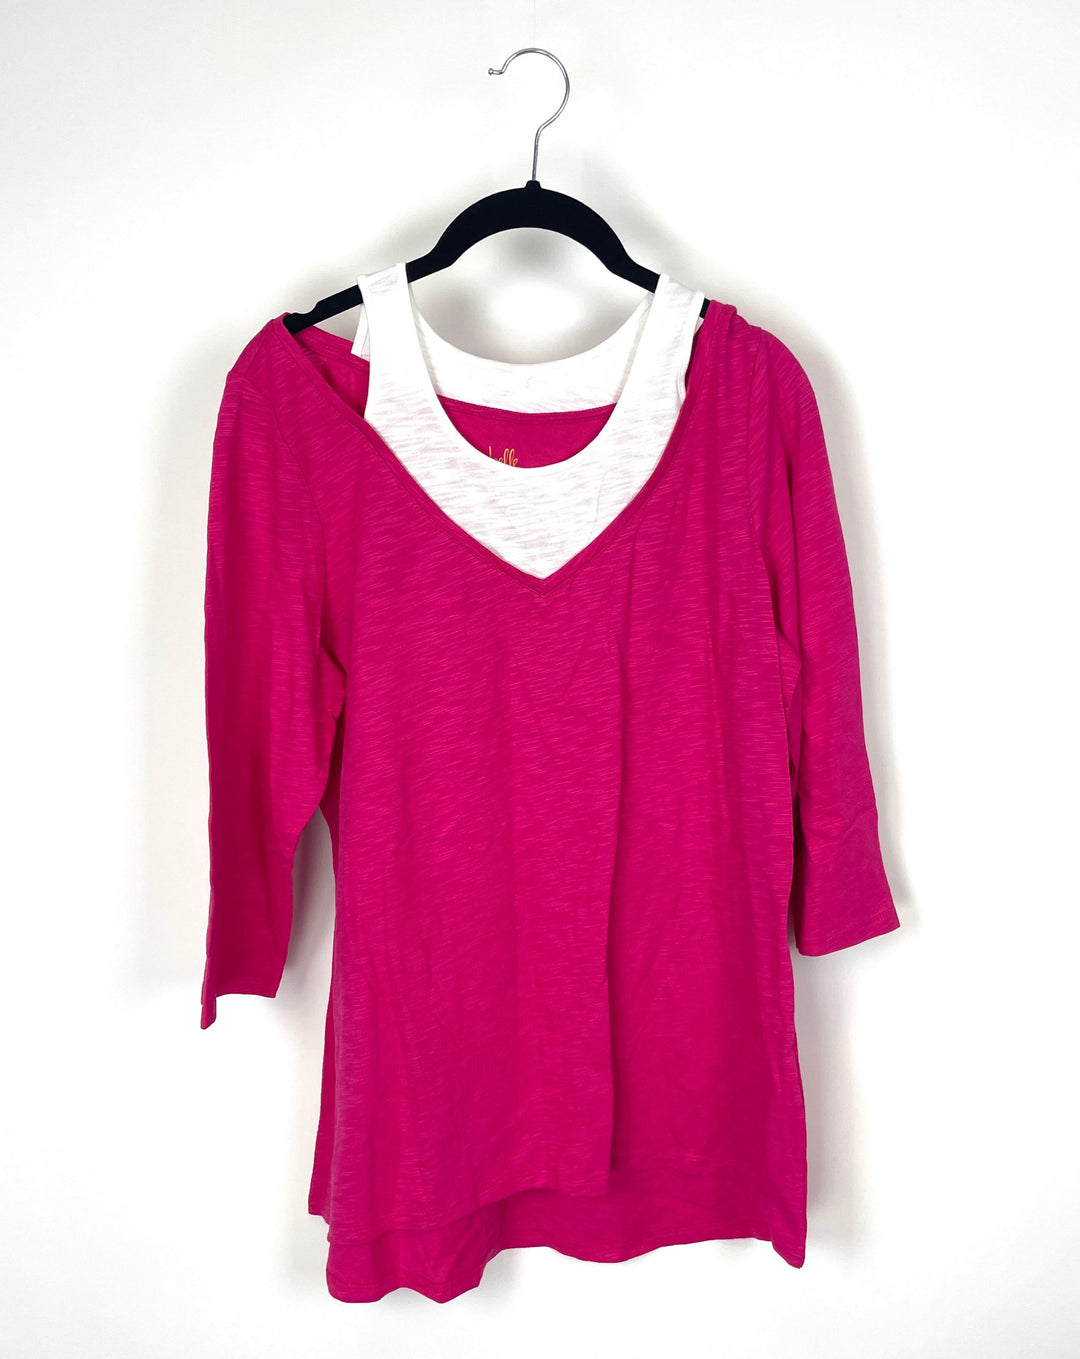 Pink Cropped Sleeve Top - Small/Medium